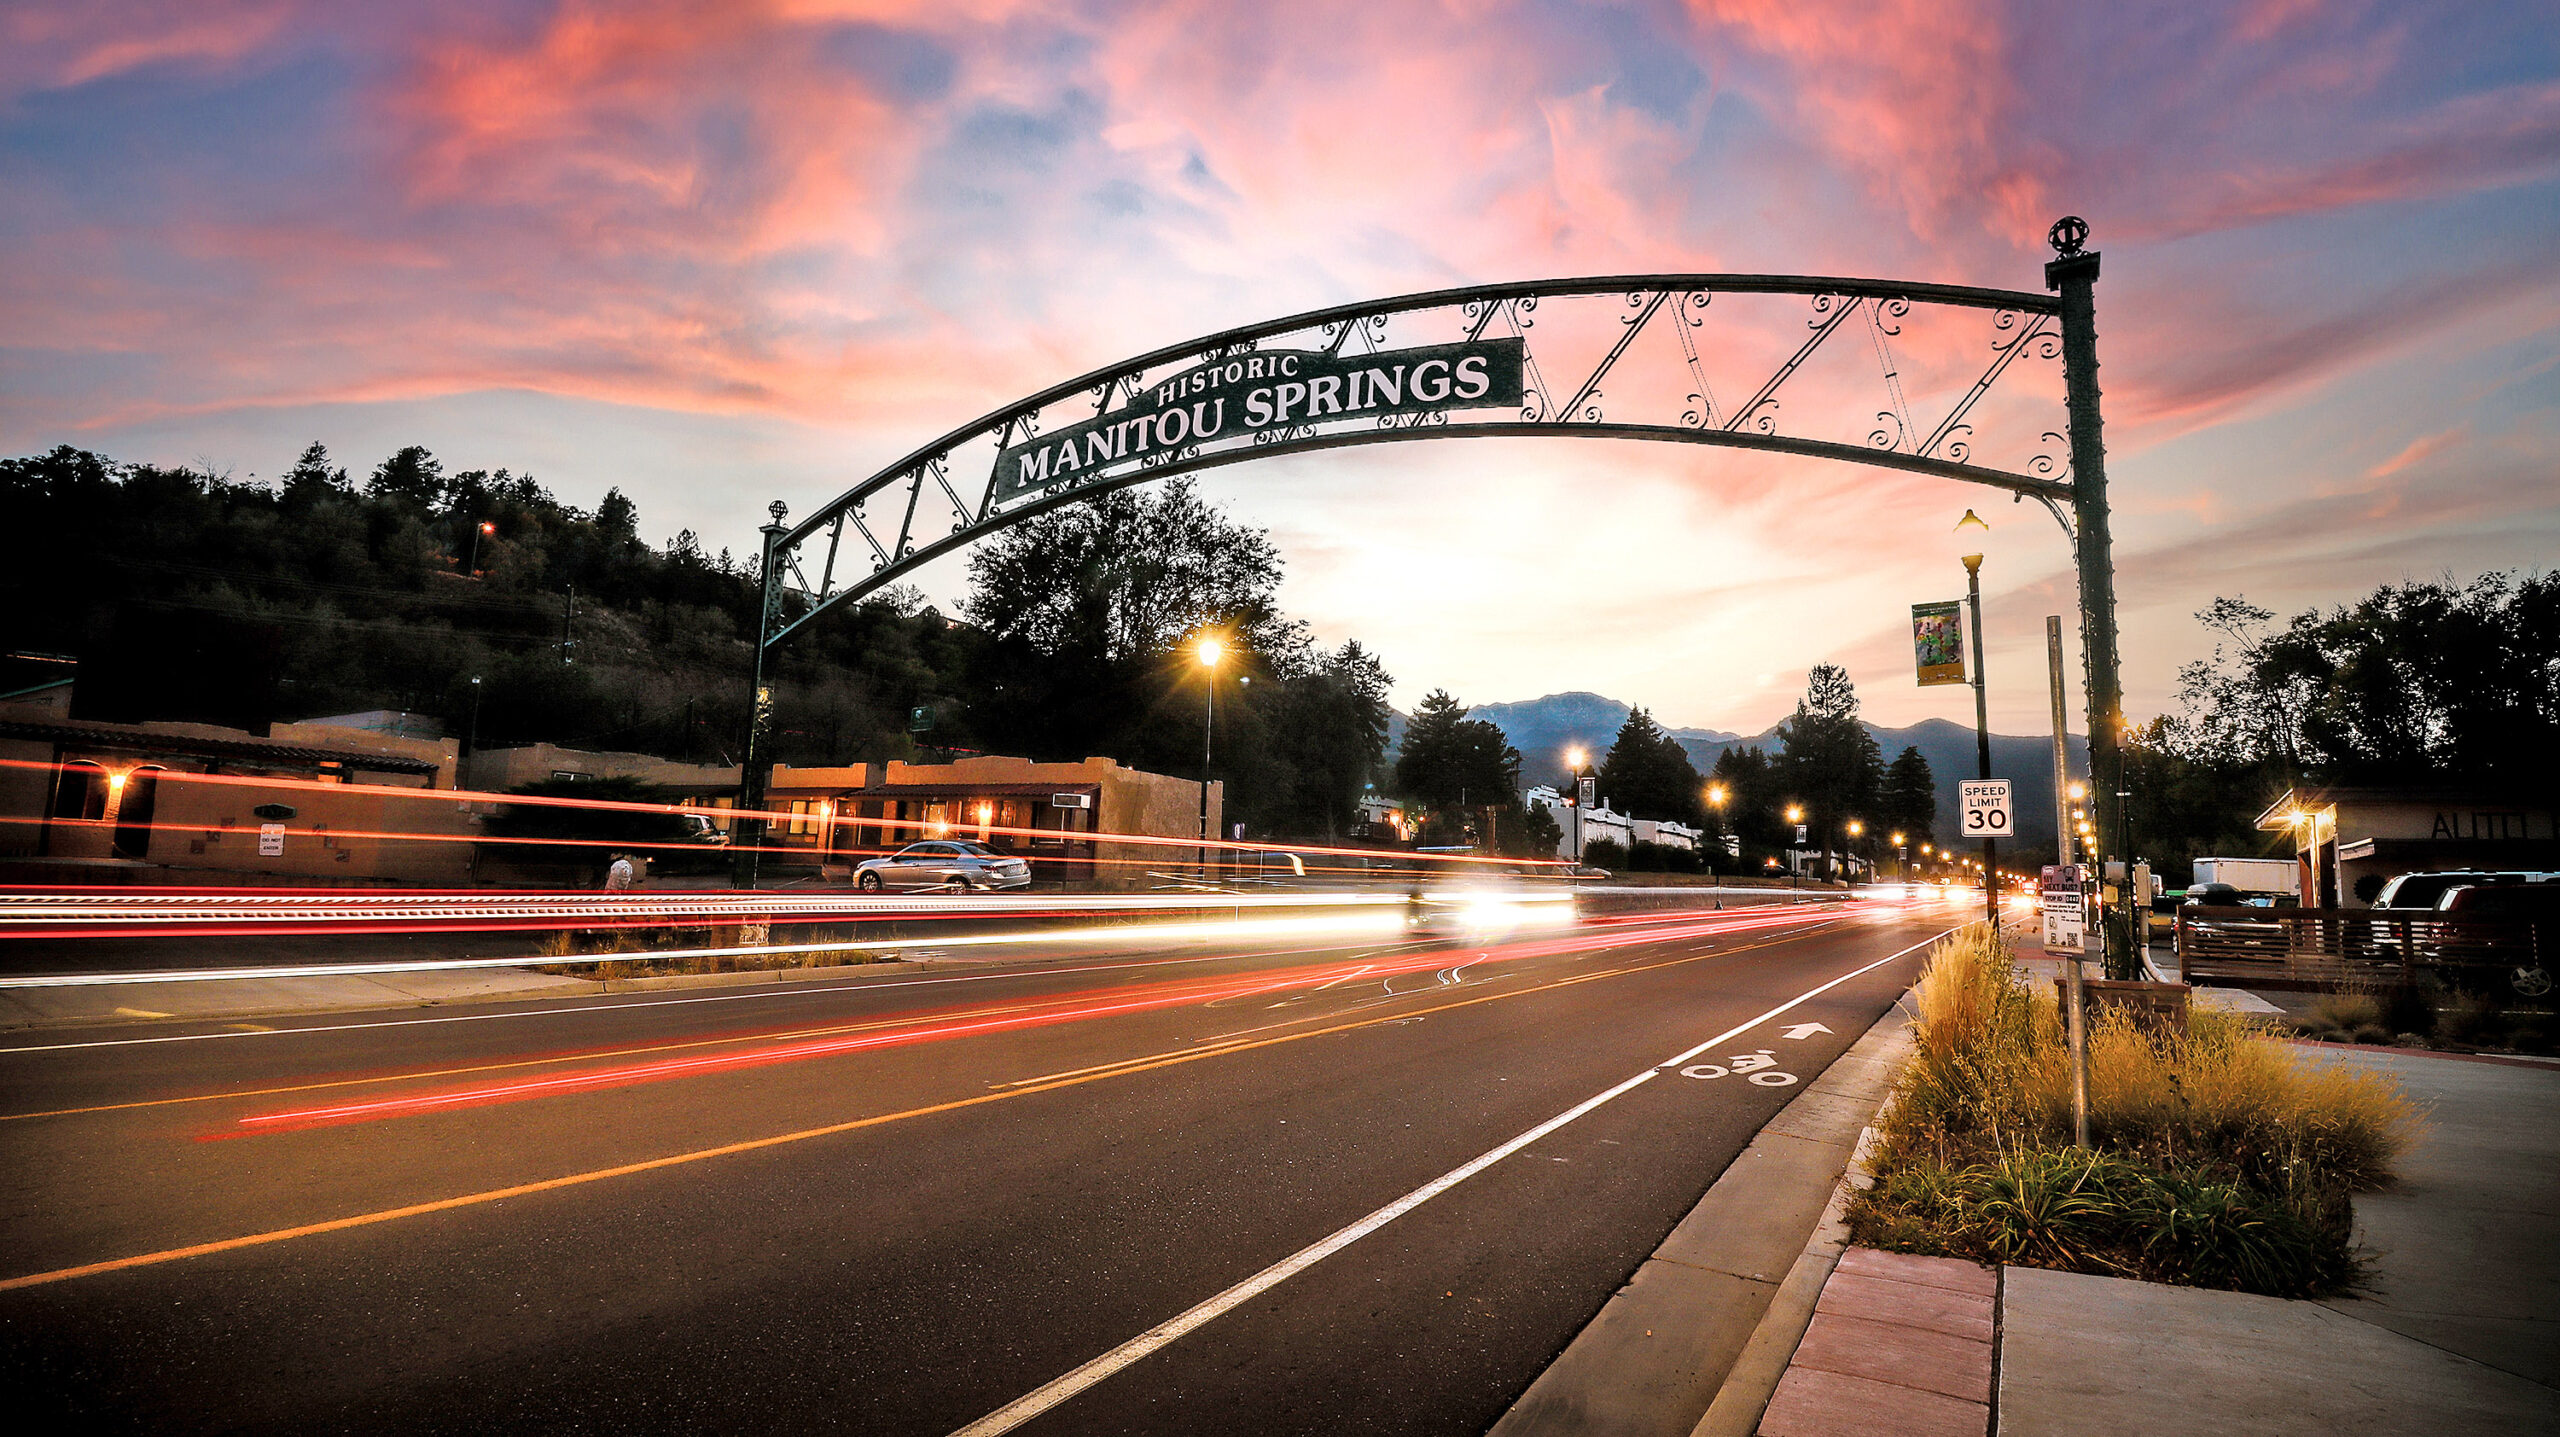 Courtesy photo. Nicole Ford won first place with this time-exposure photo of the eastern welcome arch.